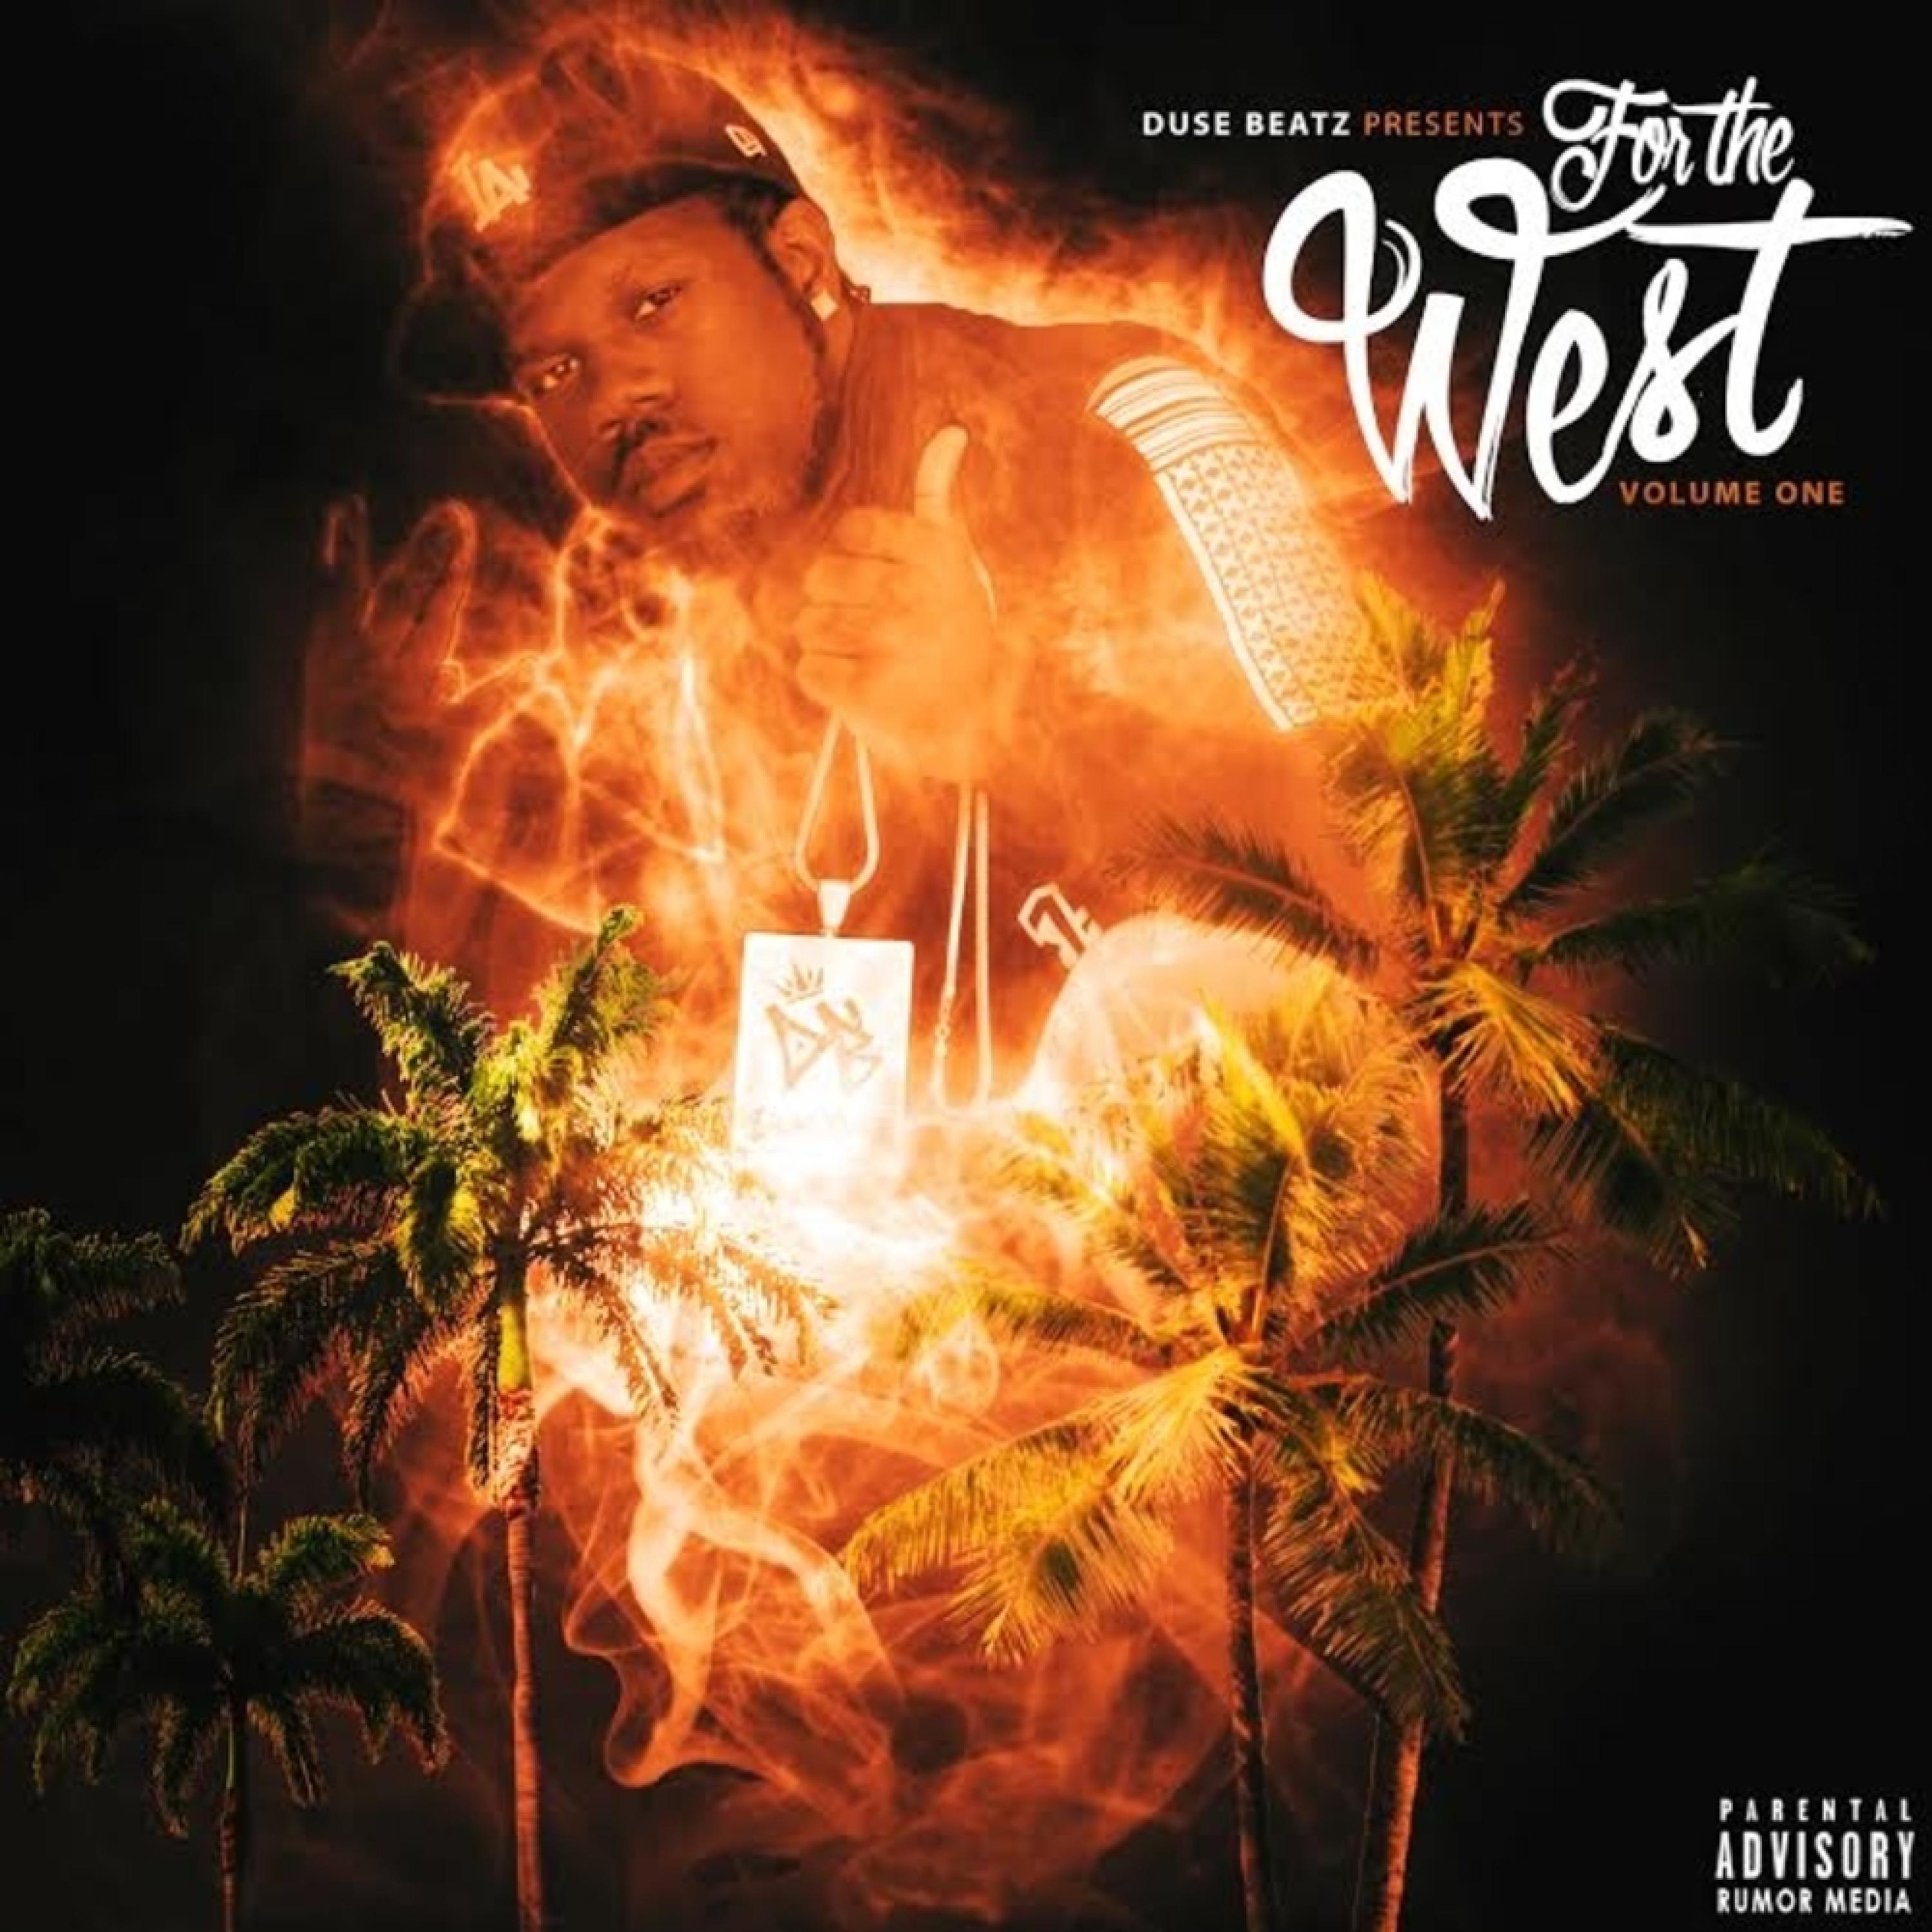 For the West, Vol. 1